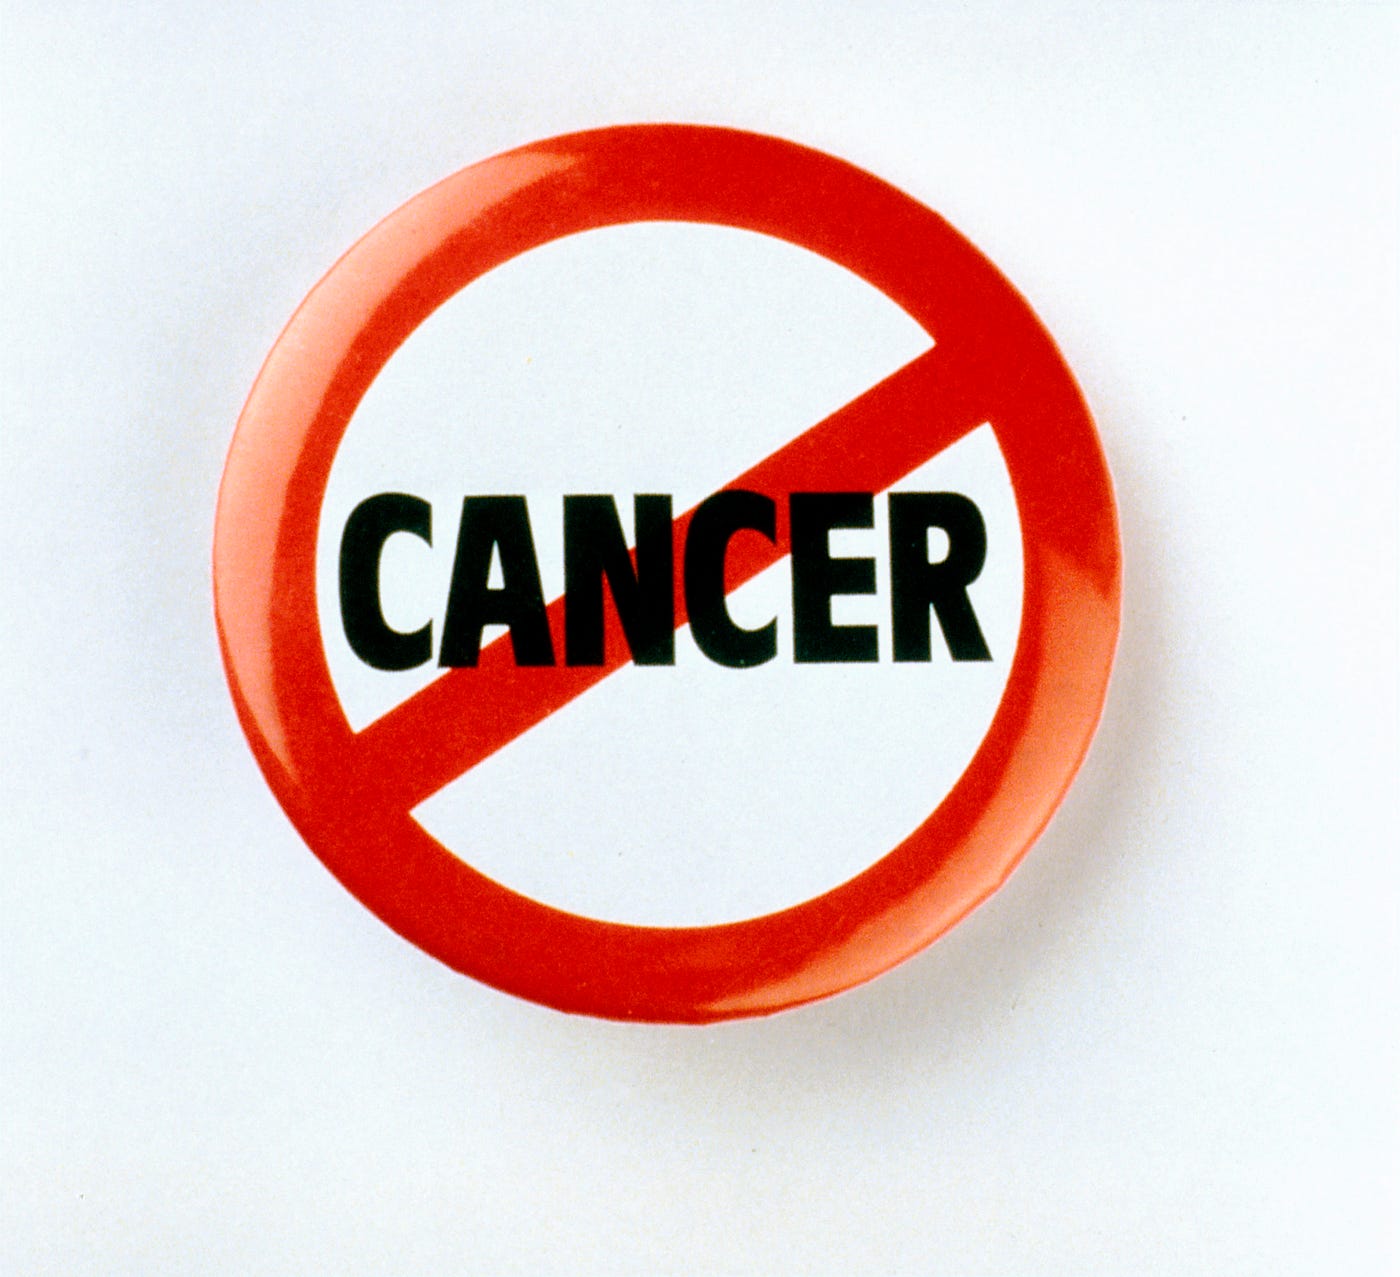 The word CANCER, with a red diagonal stripe crossing it. The American Cancer Society observes that scientists have reported T.H.C. and other cannabinoids (including CBD) slow growth or cause the death of certain types of cancer cells growing in lab dishes.